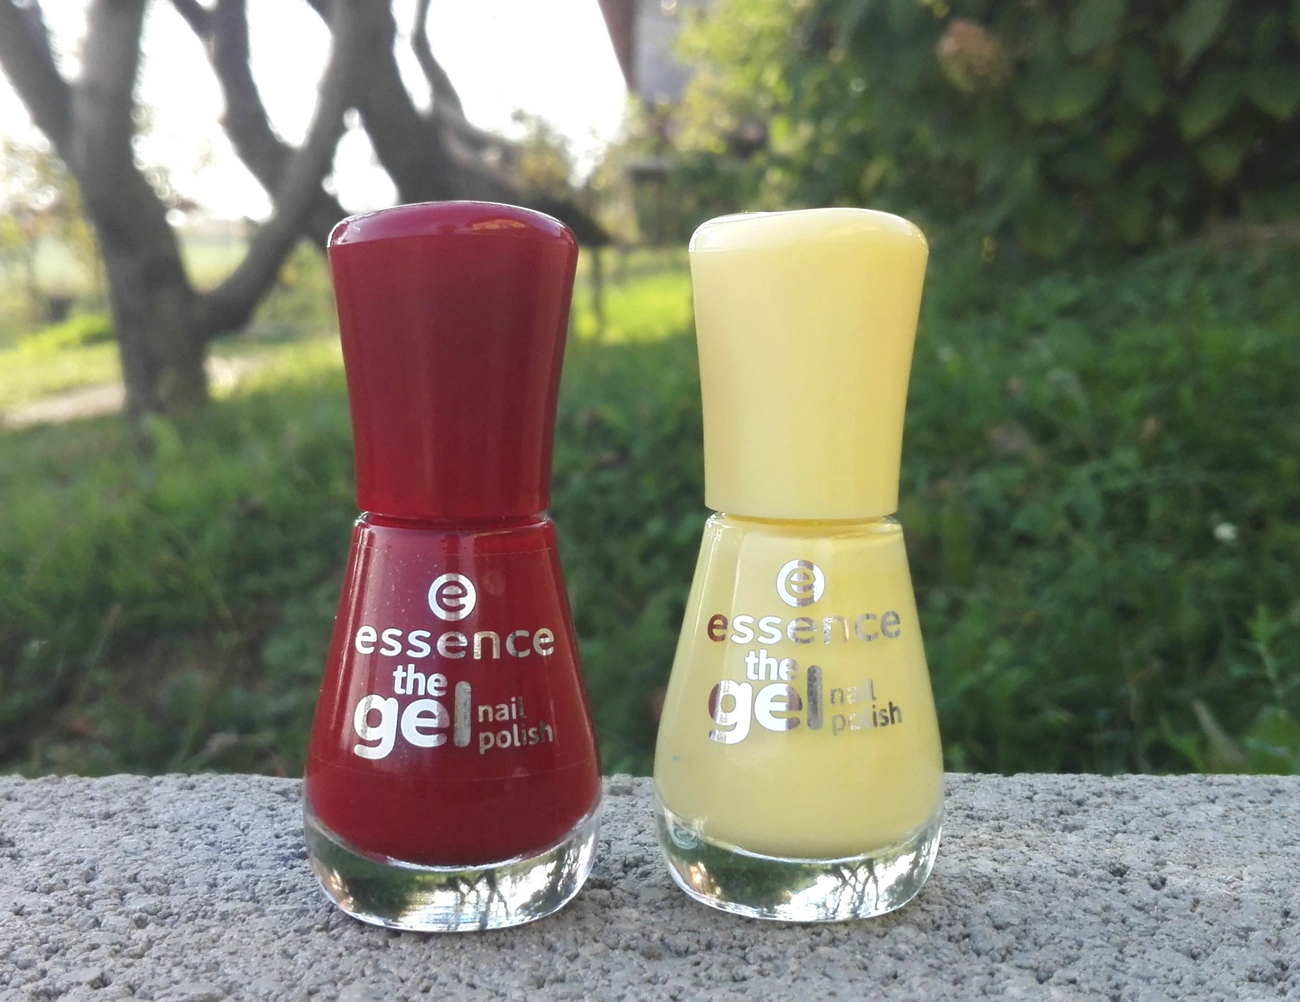 Essence Nail Art Base Coat Swatches - wide 10